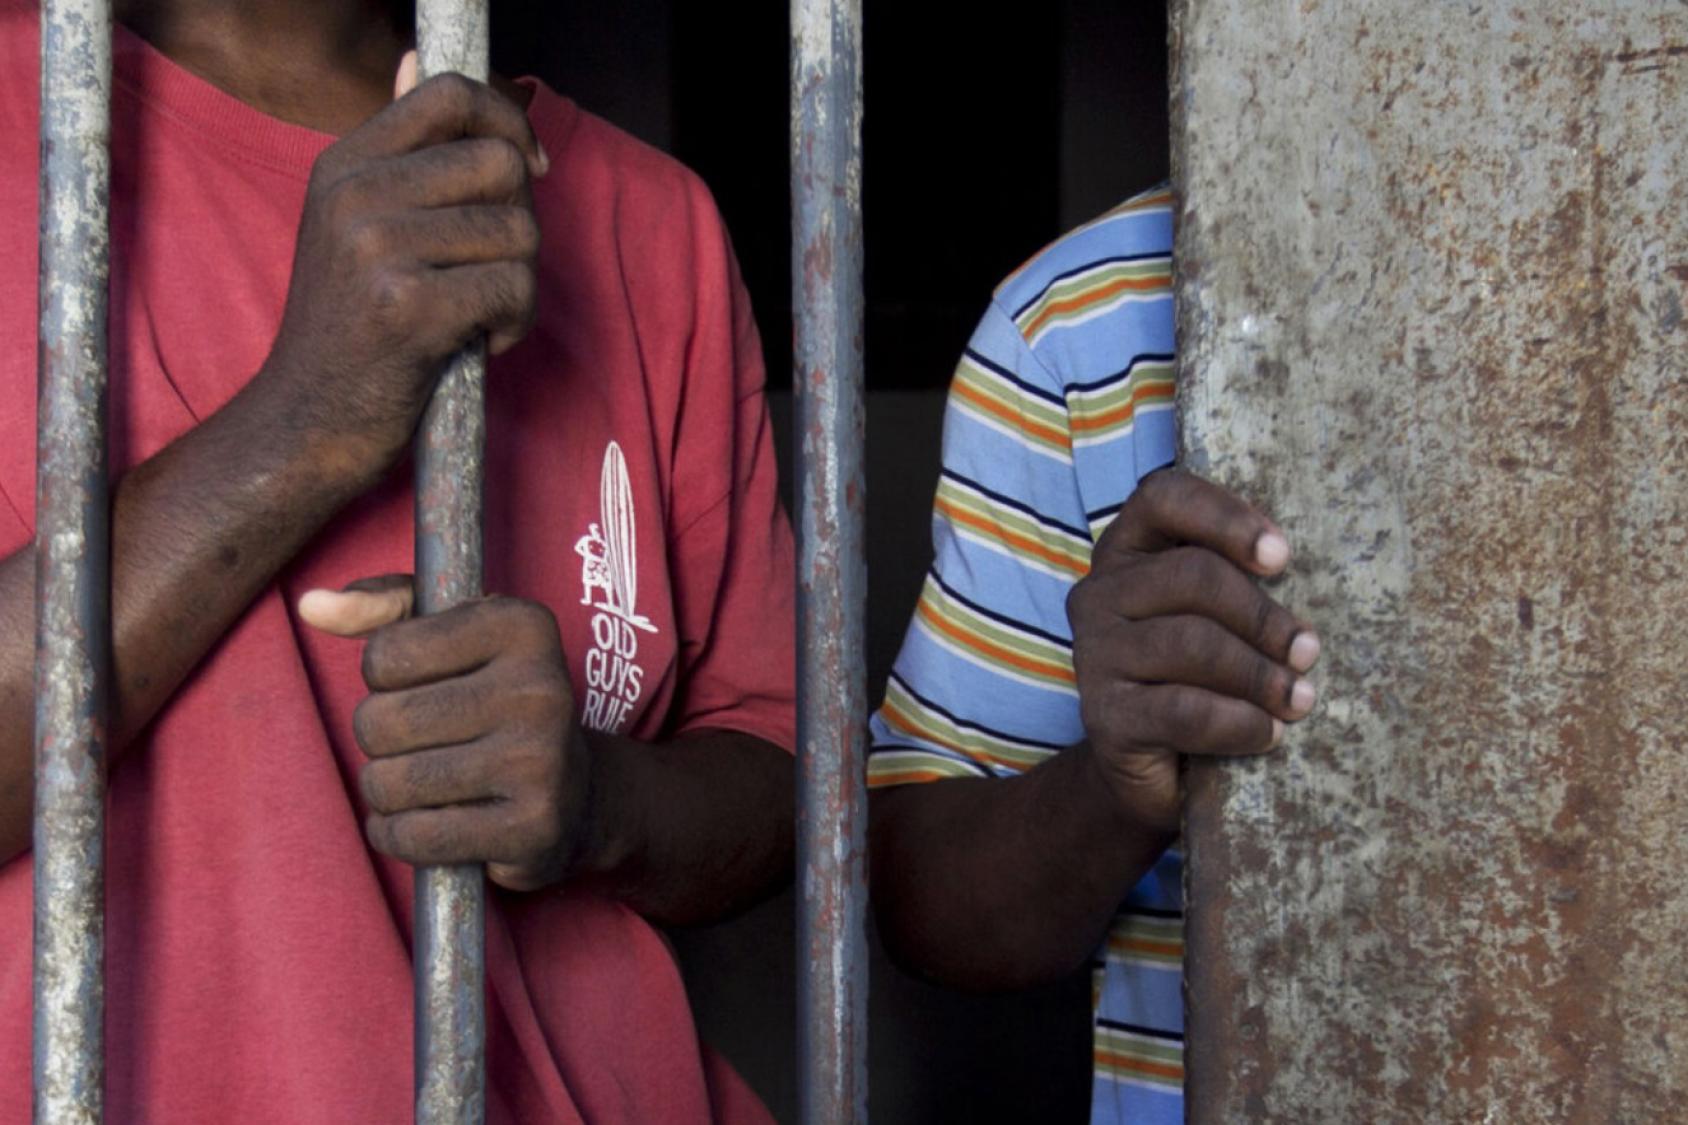 Close-up of two boys with their faces off-camera standing behind the bars of a prison cell.